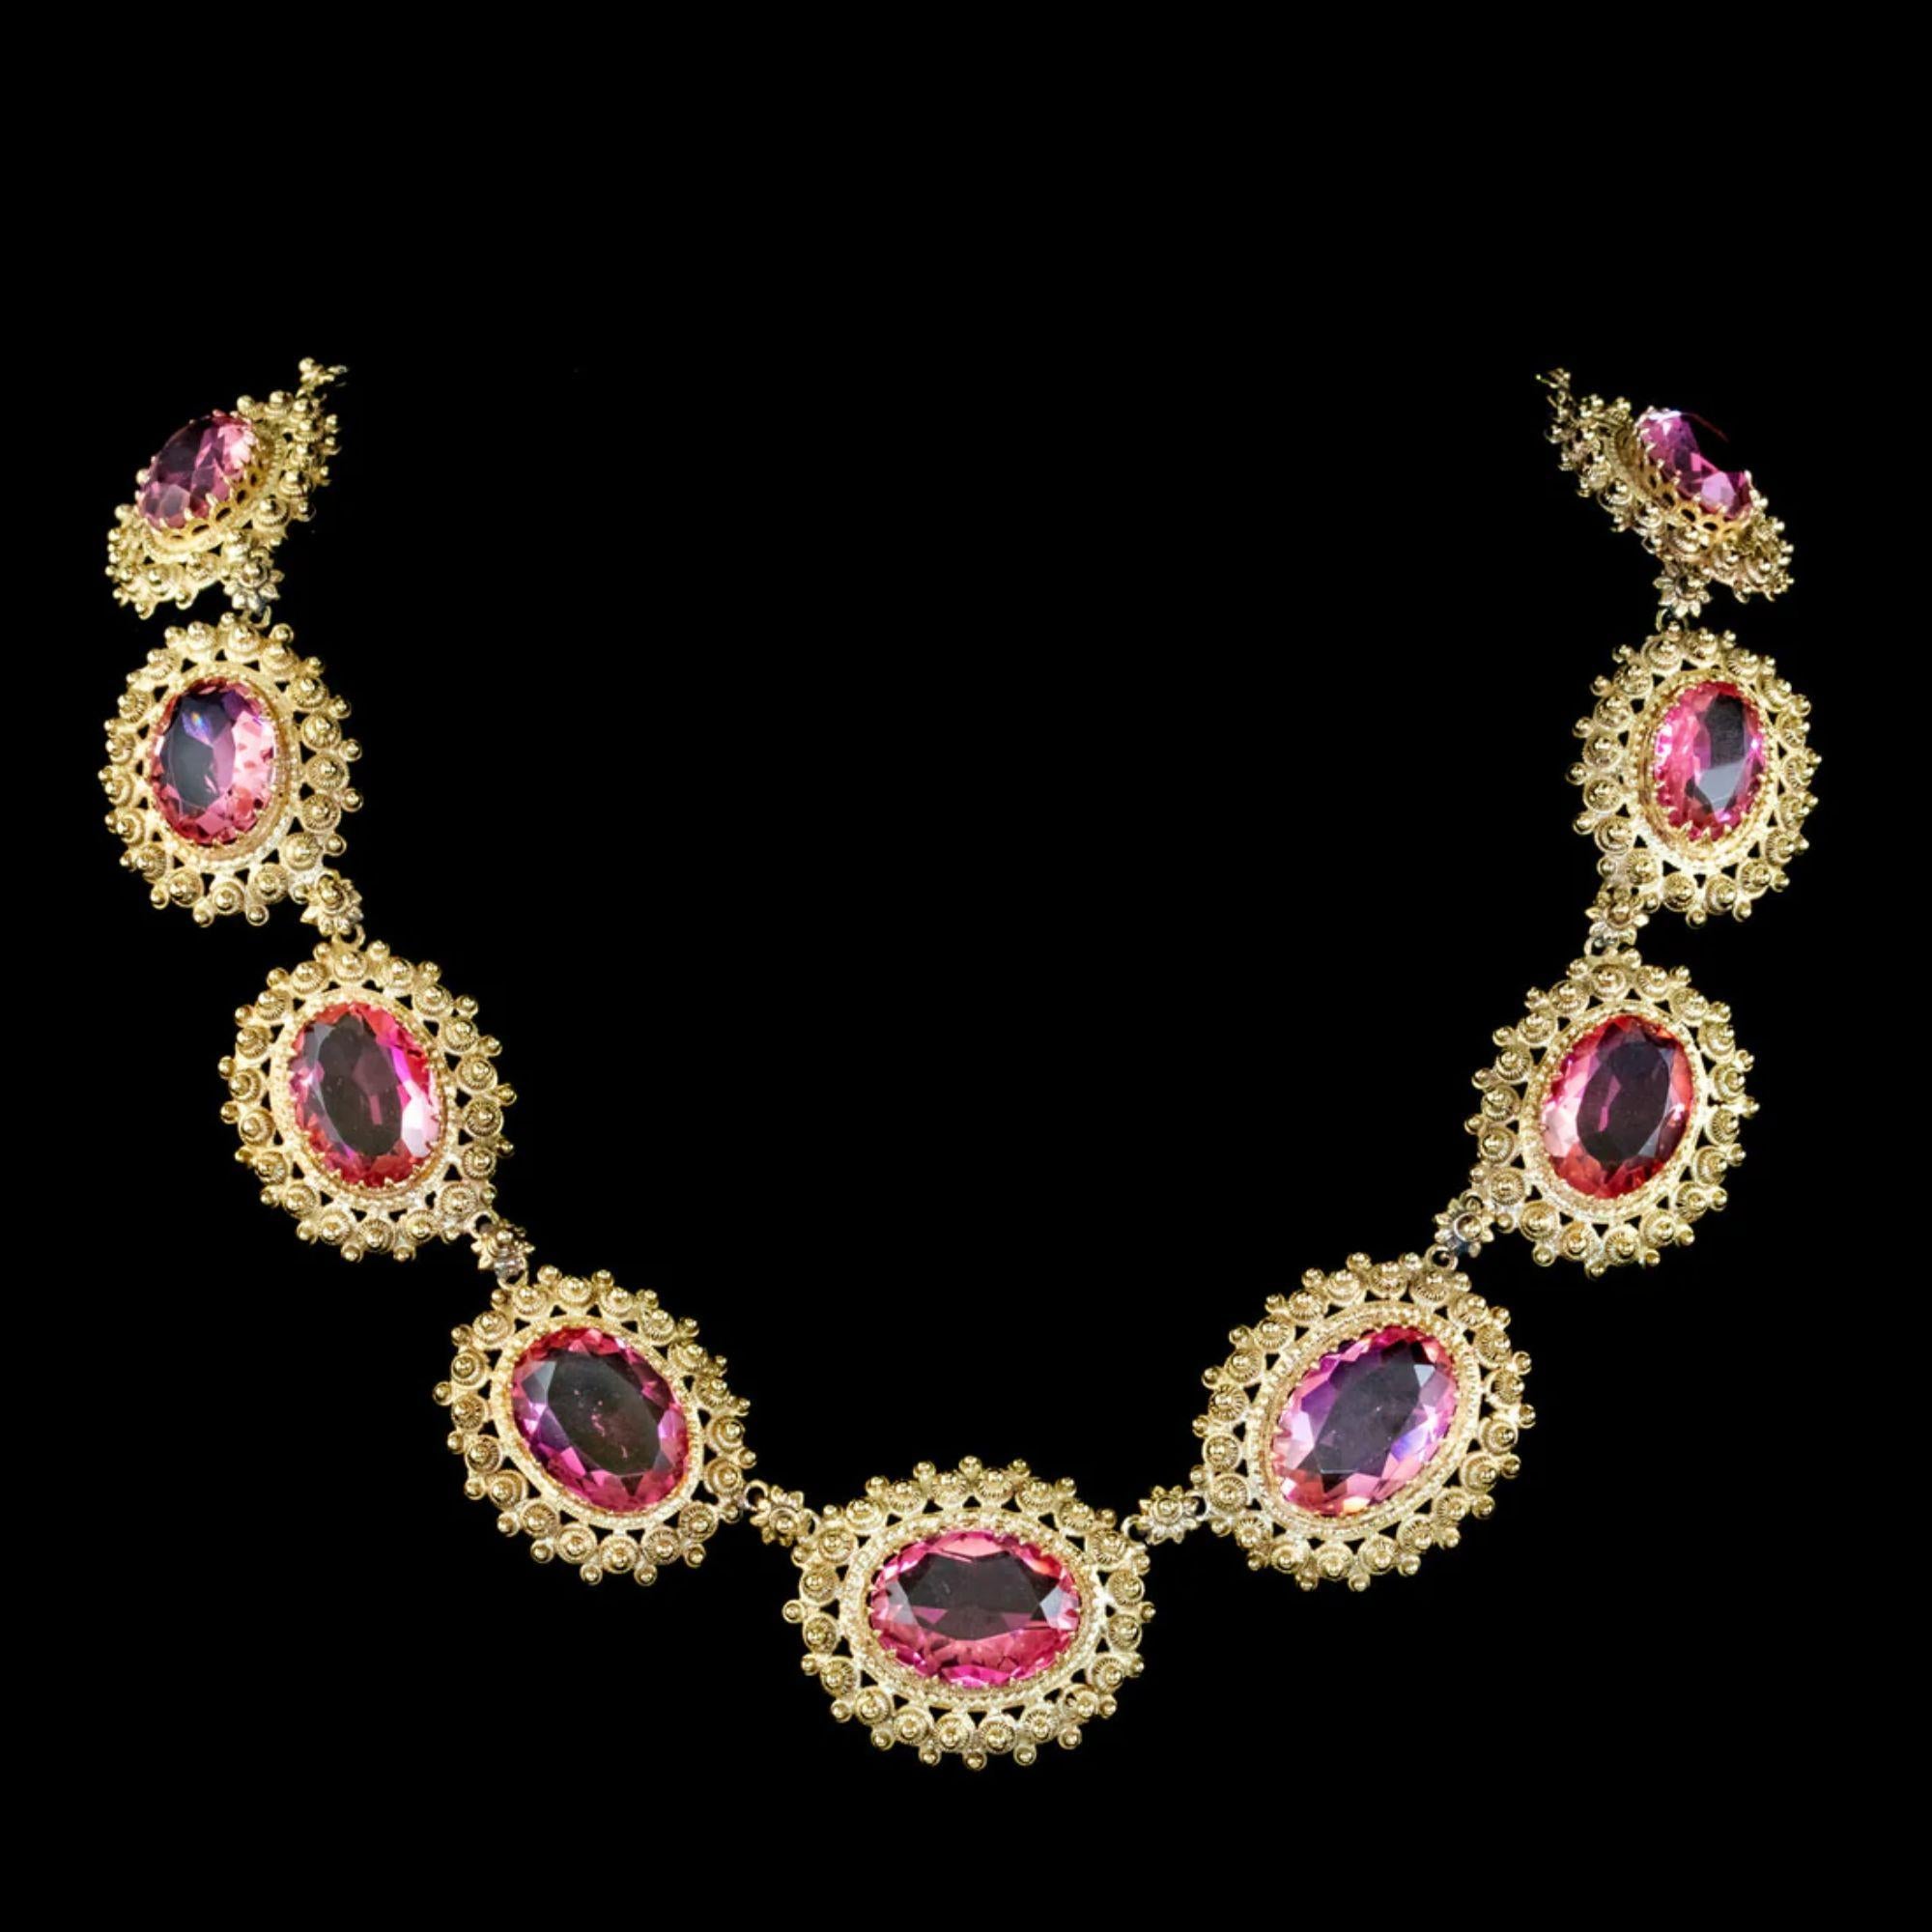 A grand Antique mid Victorian collar dating from Circa 1860. The piece is made up of large Pinchbeck links gilded in 18ct Yellow Gold with stunning Cannetille workmanship and flower shaped links in between.

A large pink Paste stone is also claw set